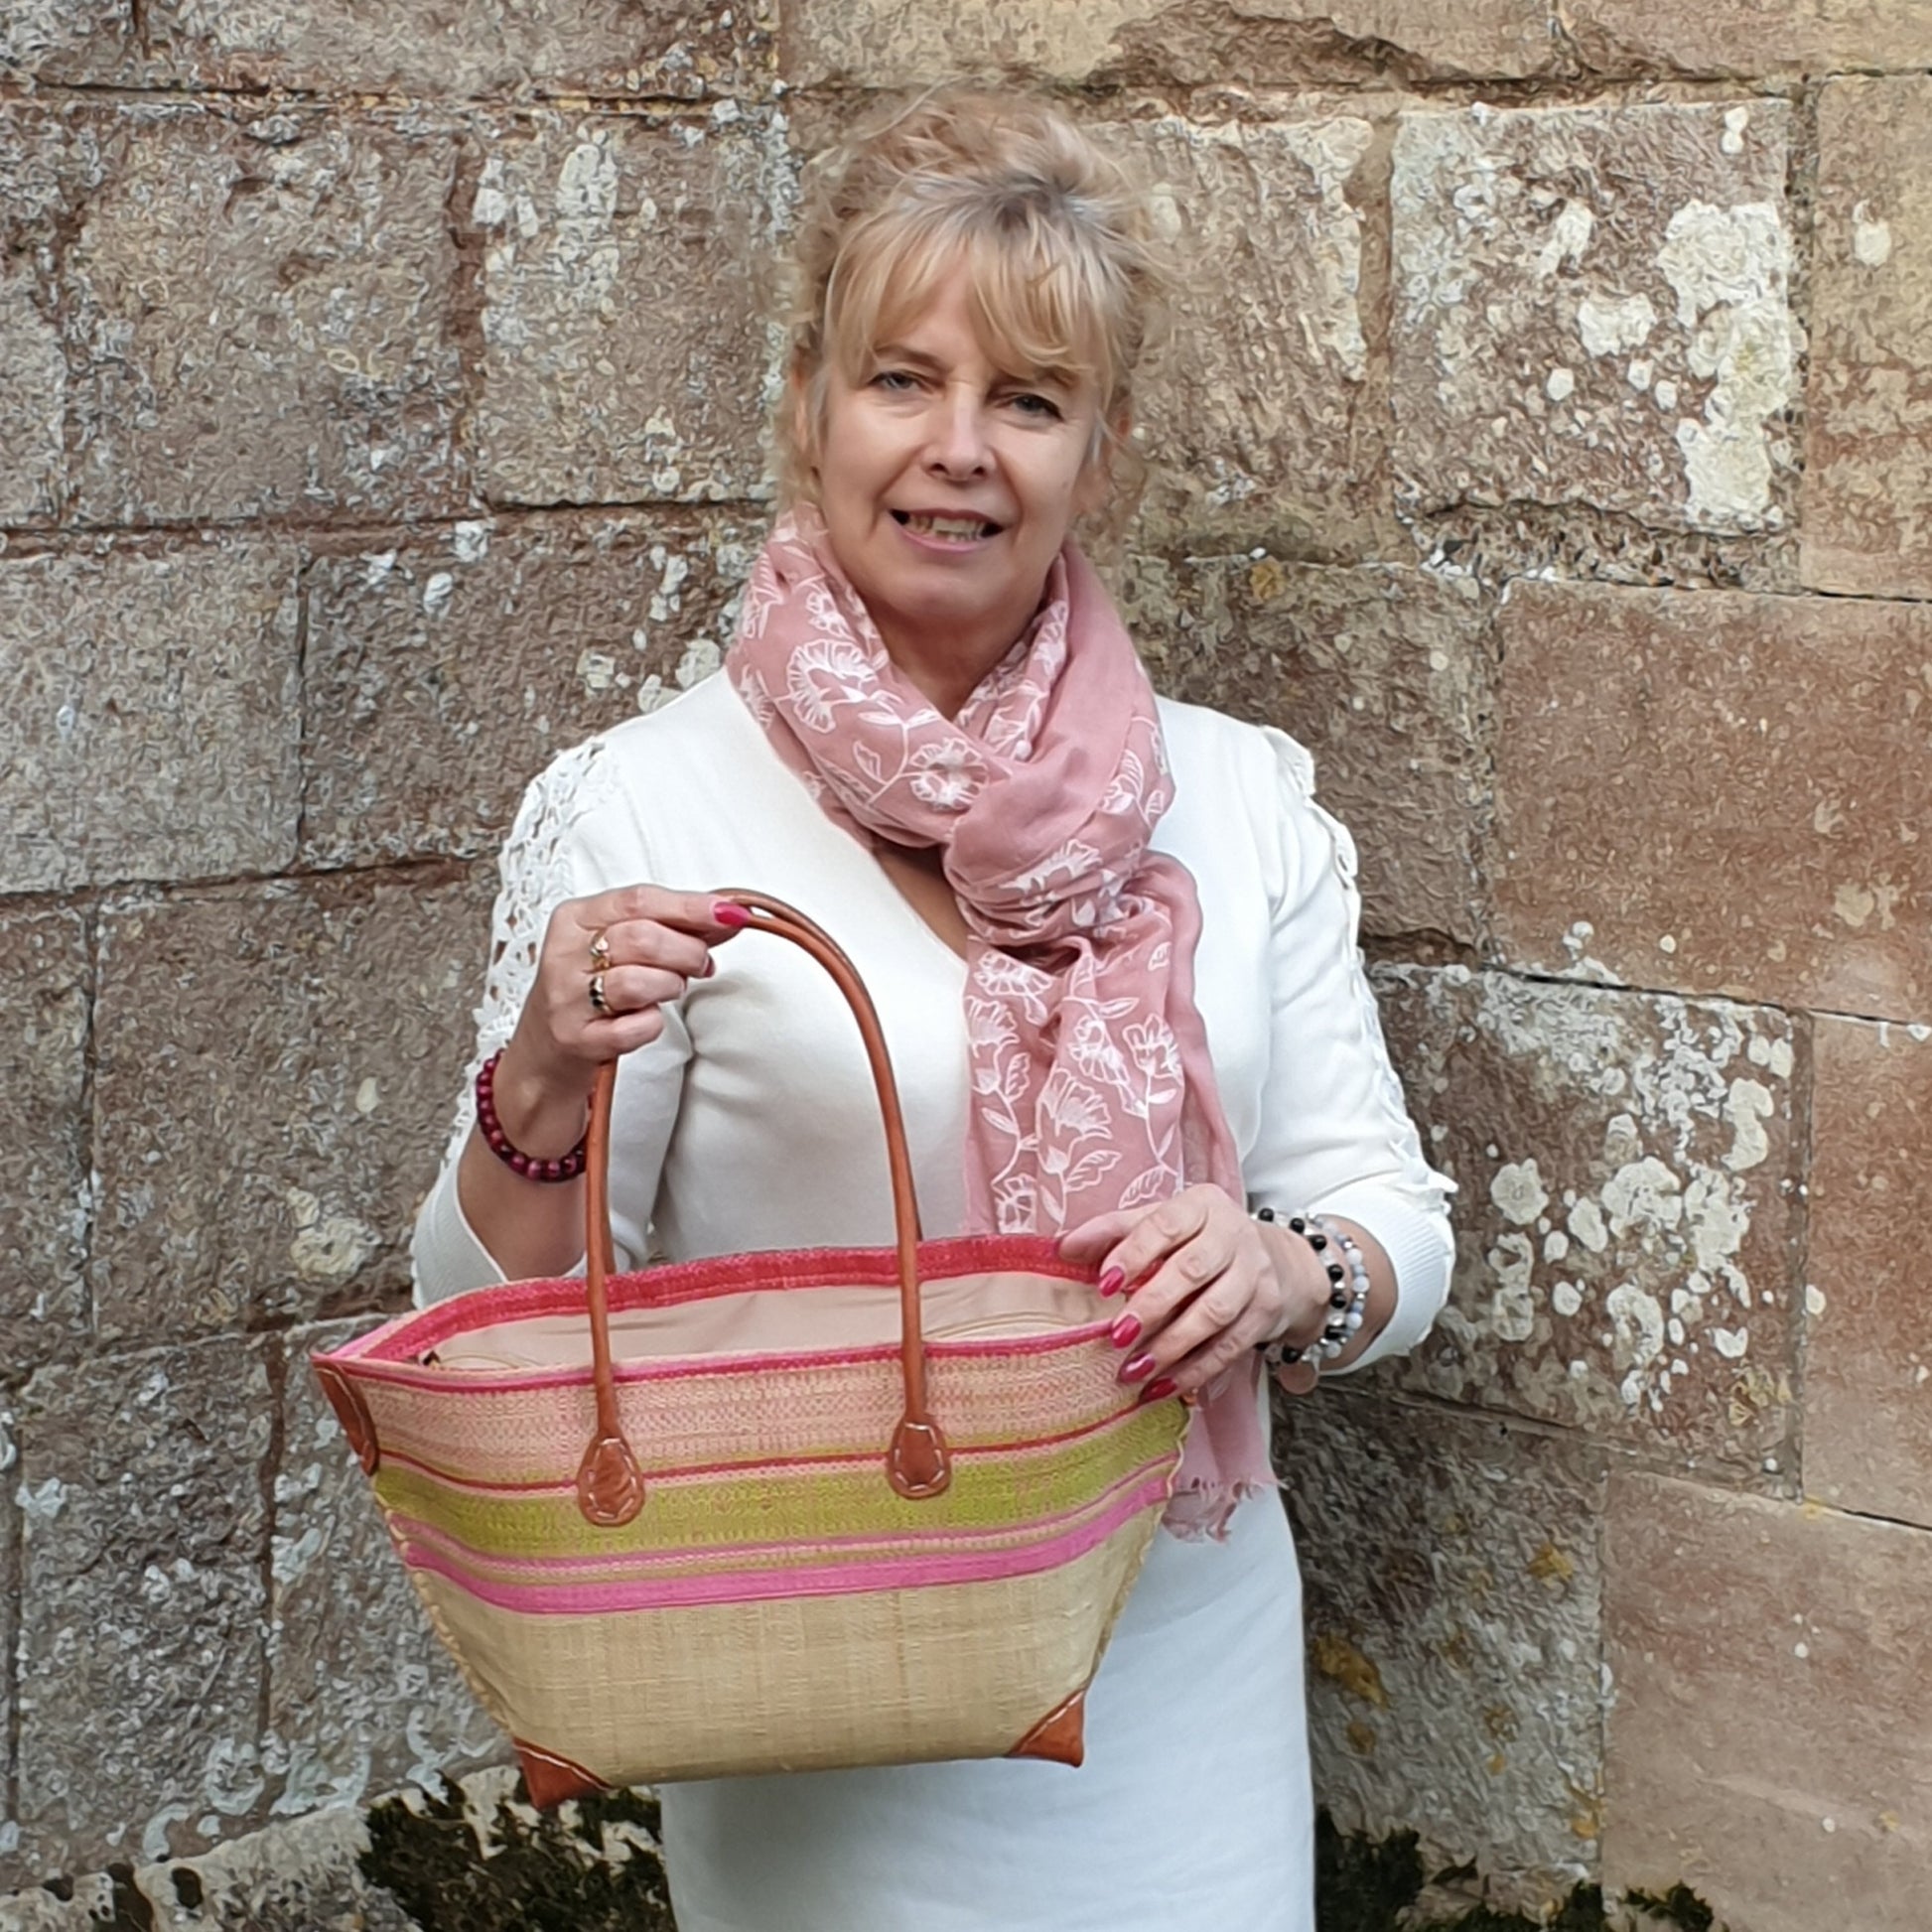 Lady wearing pink scarf and carrying a pink striped raffia basket